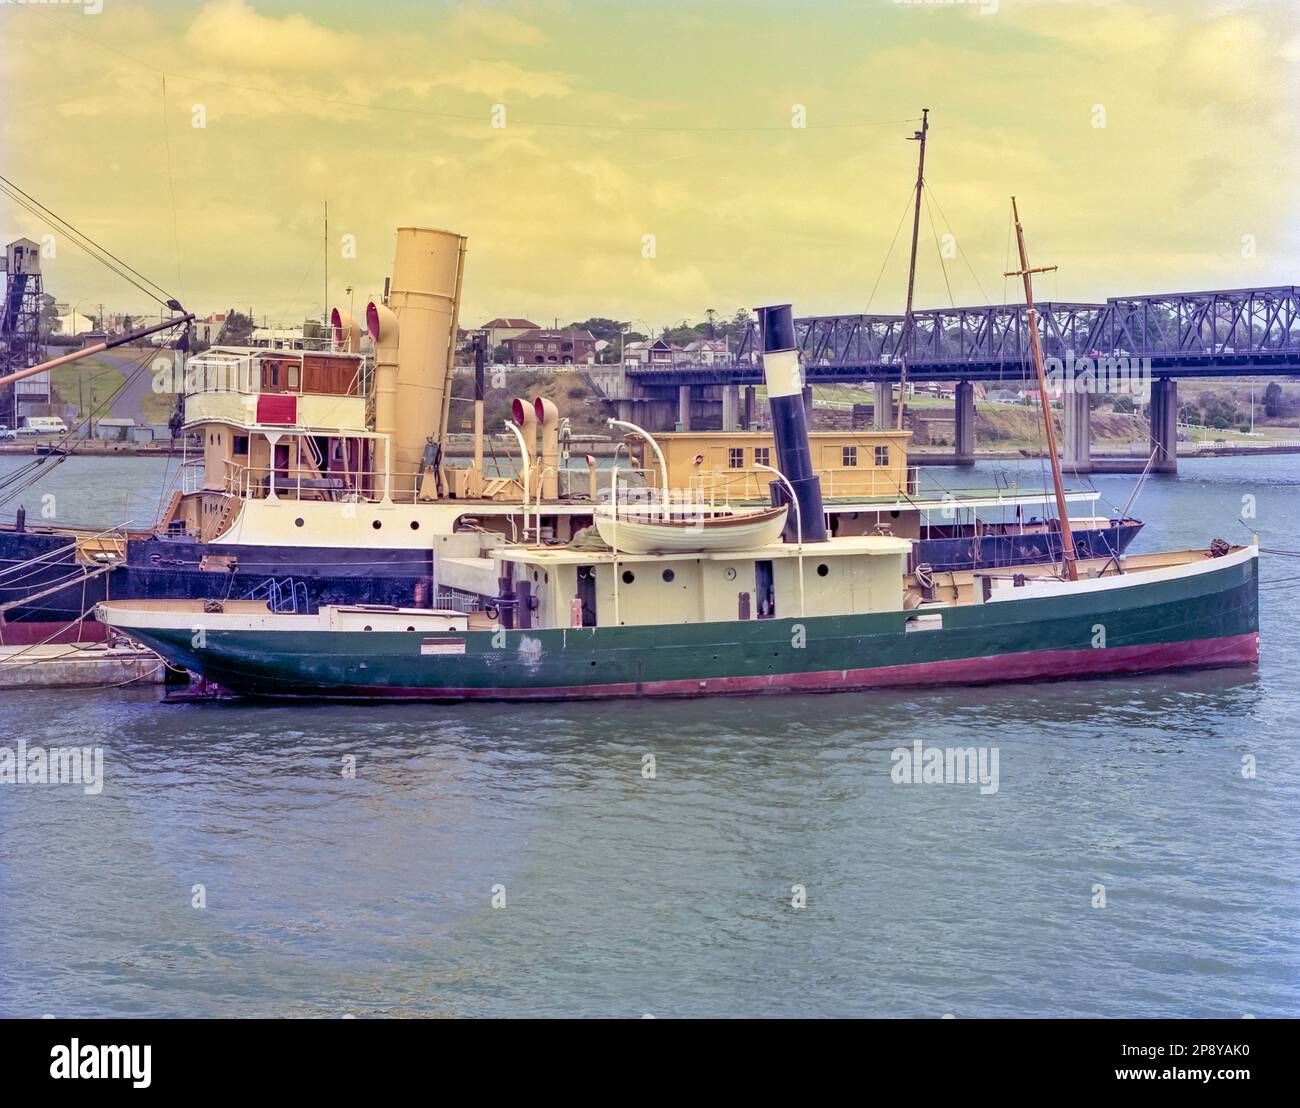 A 1981 historic image of the 1927 launched, SS John Oxley, a coal and later oil fired steamer used by the Queensland Government to support lighthouses and act as a pilot boat. She was donated to the Sydney Heritage Fleet in 1970 and moored here at Birkenhead Point until a full 20 year restoration began in 2002. In the foreground is the coal-fired steam tug Waratah, also in a pre-restoration state and missing its wheelhouse. In the background is the old Iron Cove Bridge shown 30 years before the second bridge was opened in 2011 Stock Photo